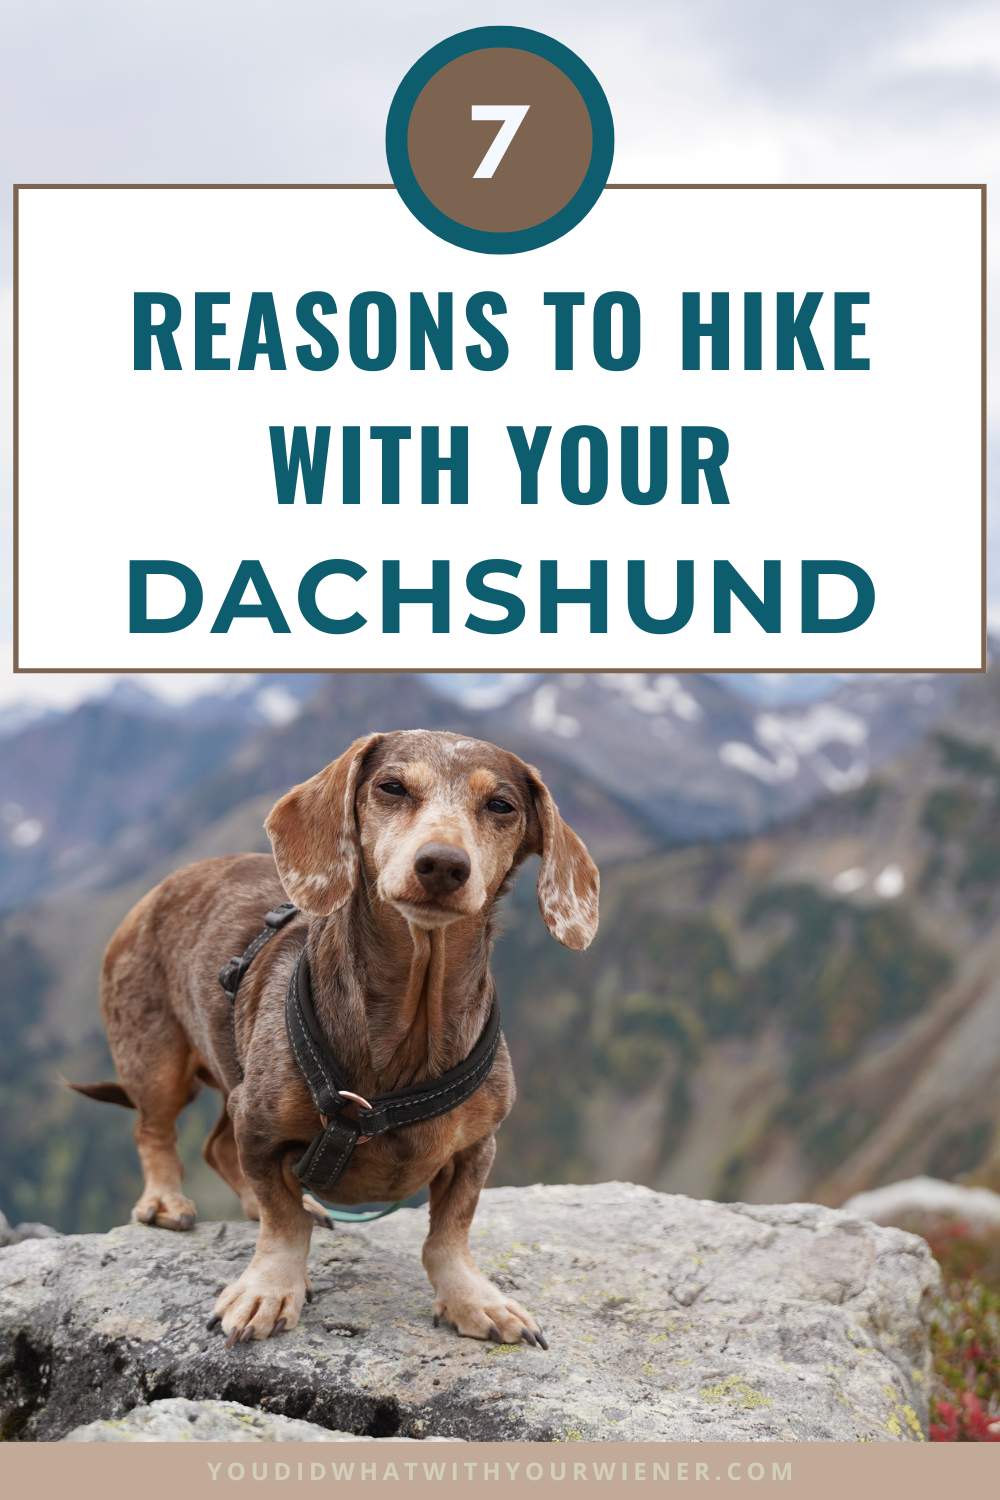 7 Reasons to Hike With Your Dachshund